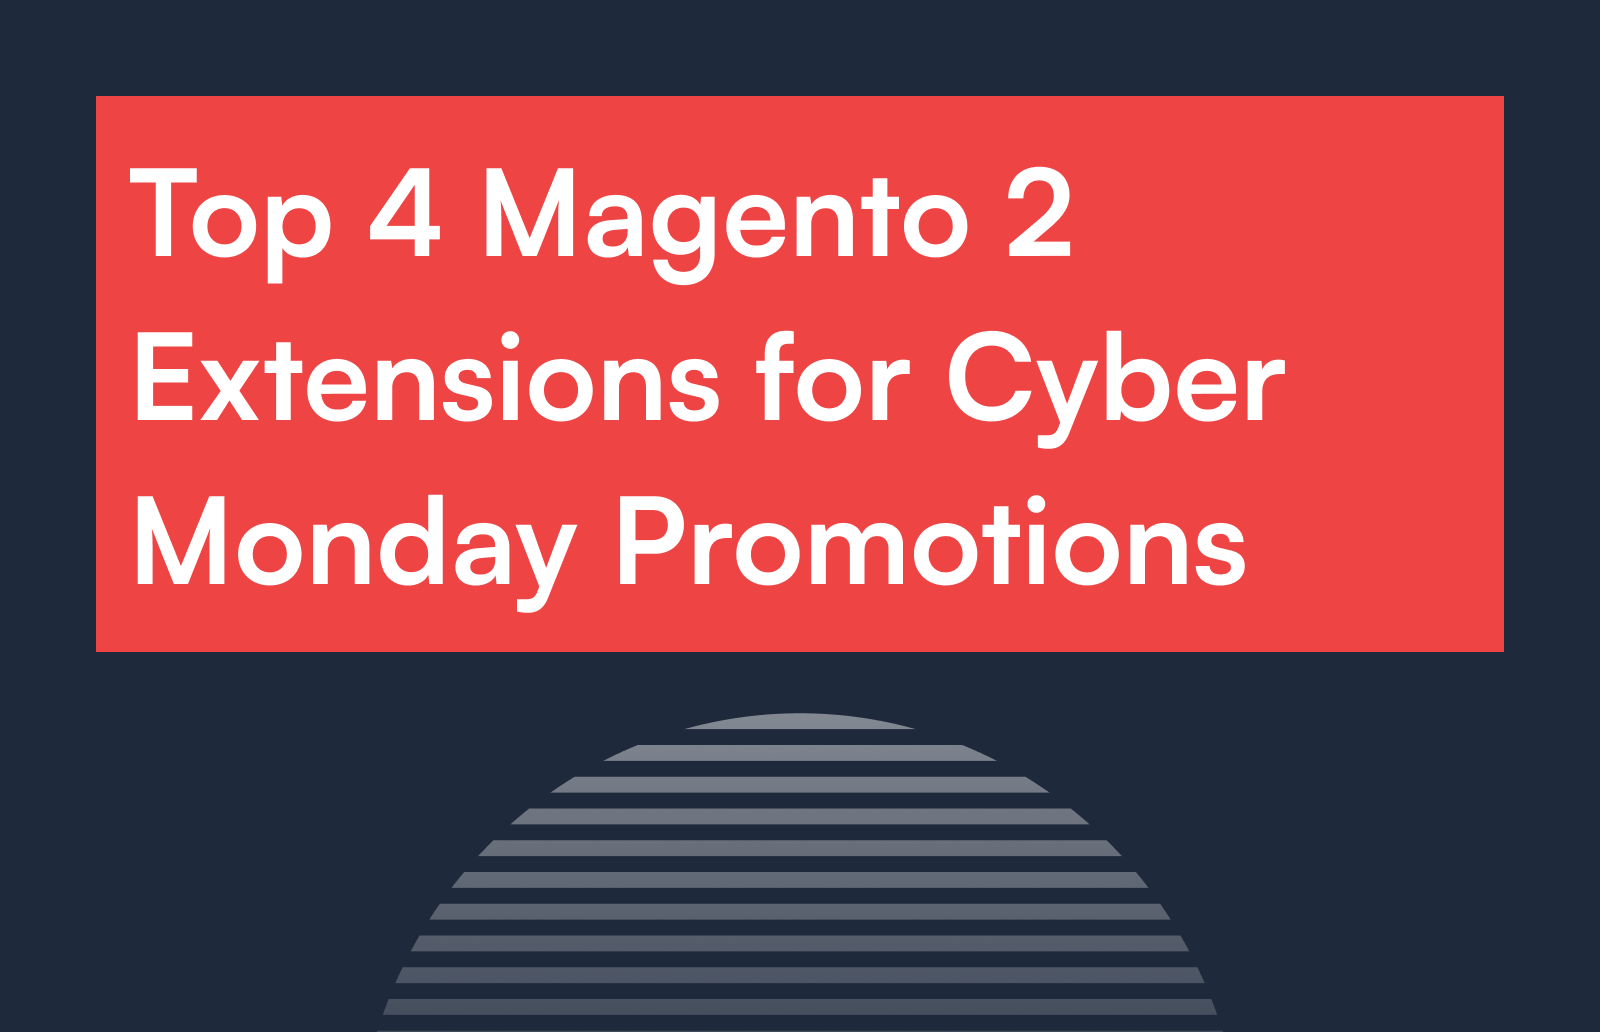 Top 4 Magento 2 Extensions for Cyber Monday Promotions